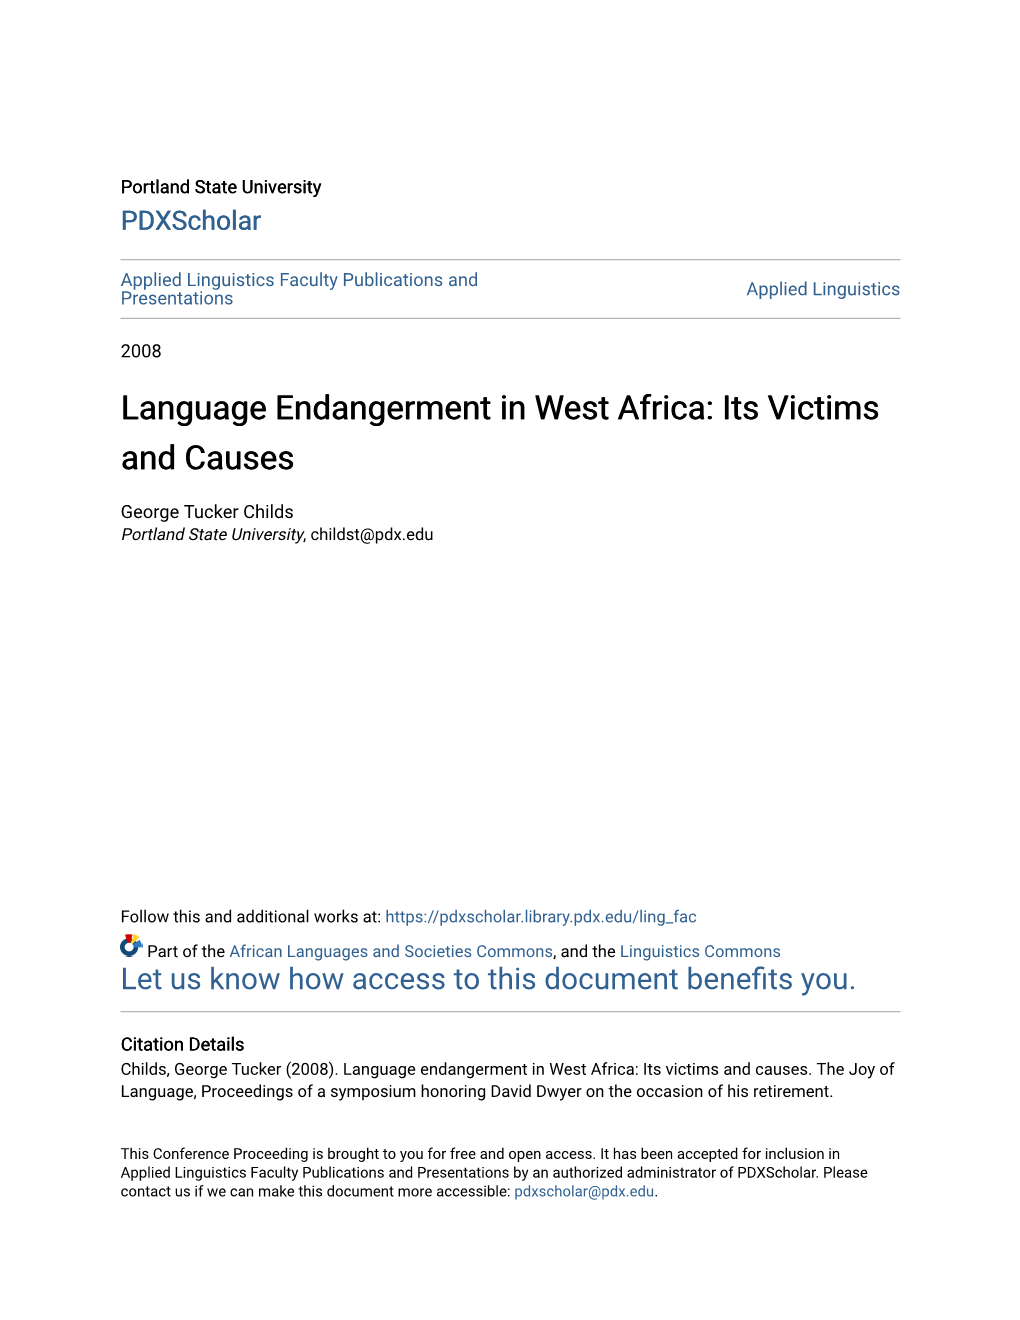 Language Endangerment in West Africa: Its Victims and Causes